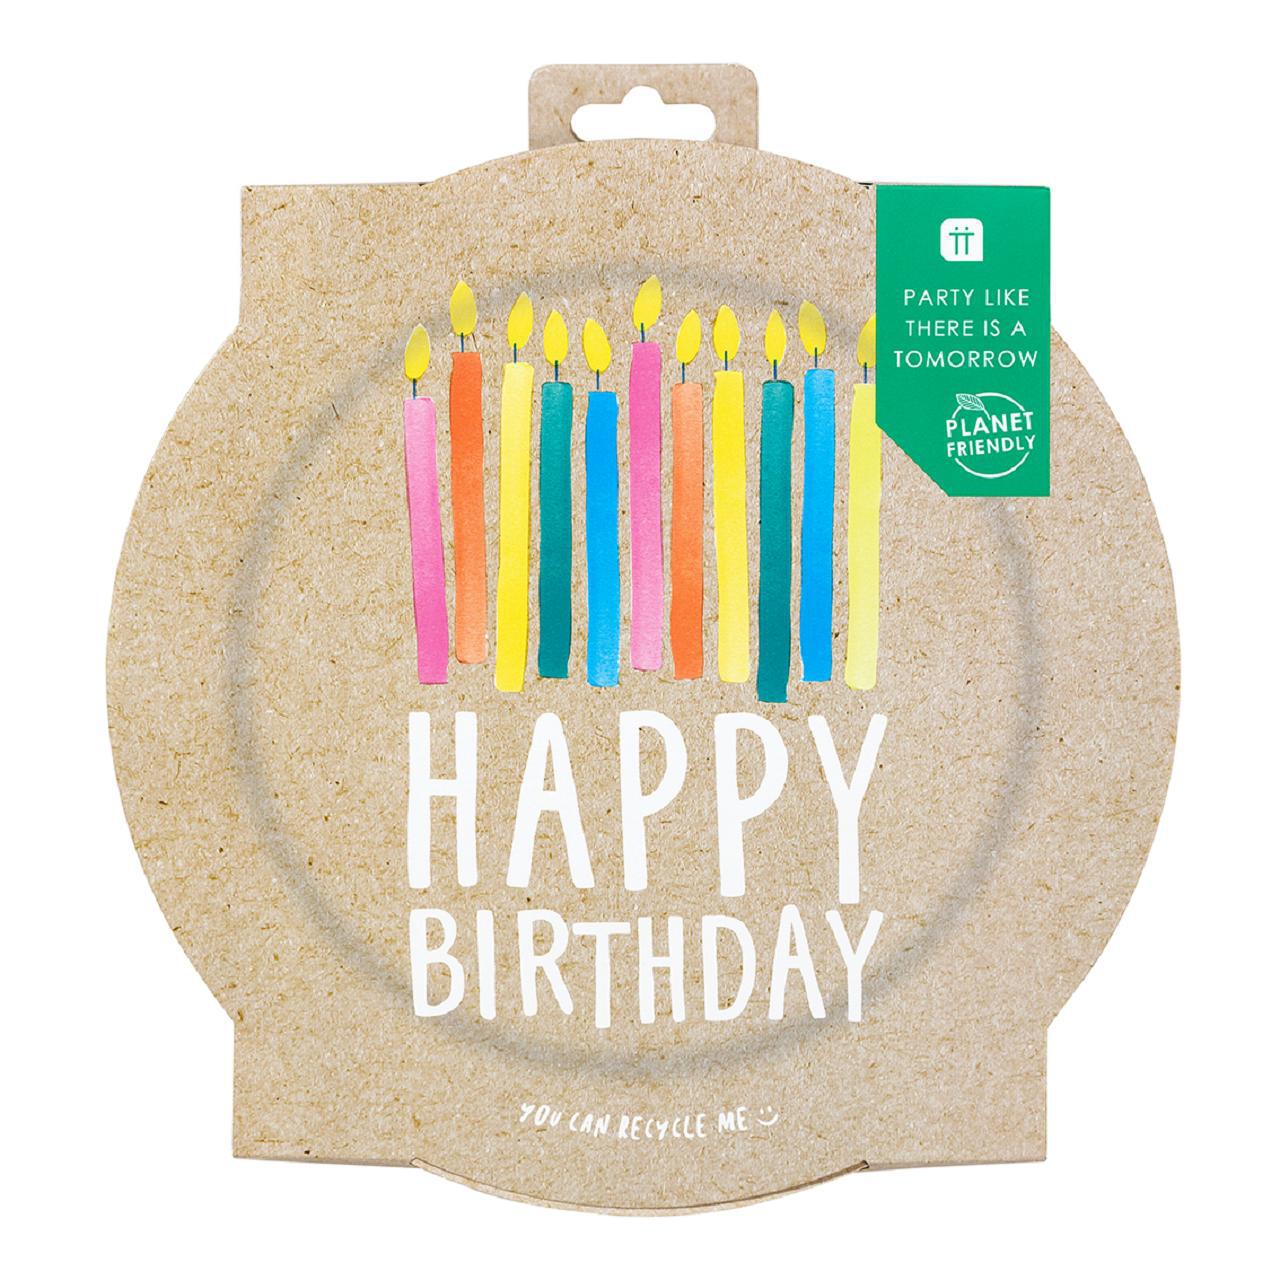 Recyclable Birthday Paper Plates 23cm 12 per pack